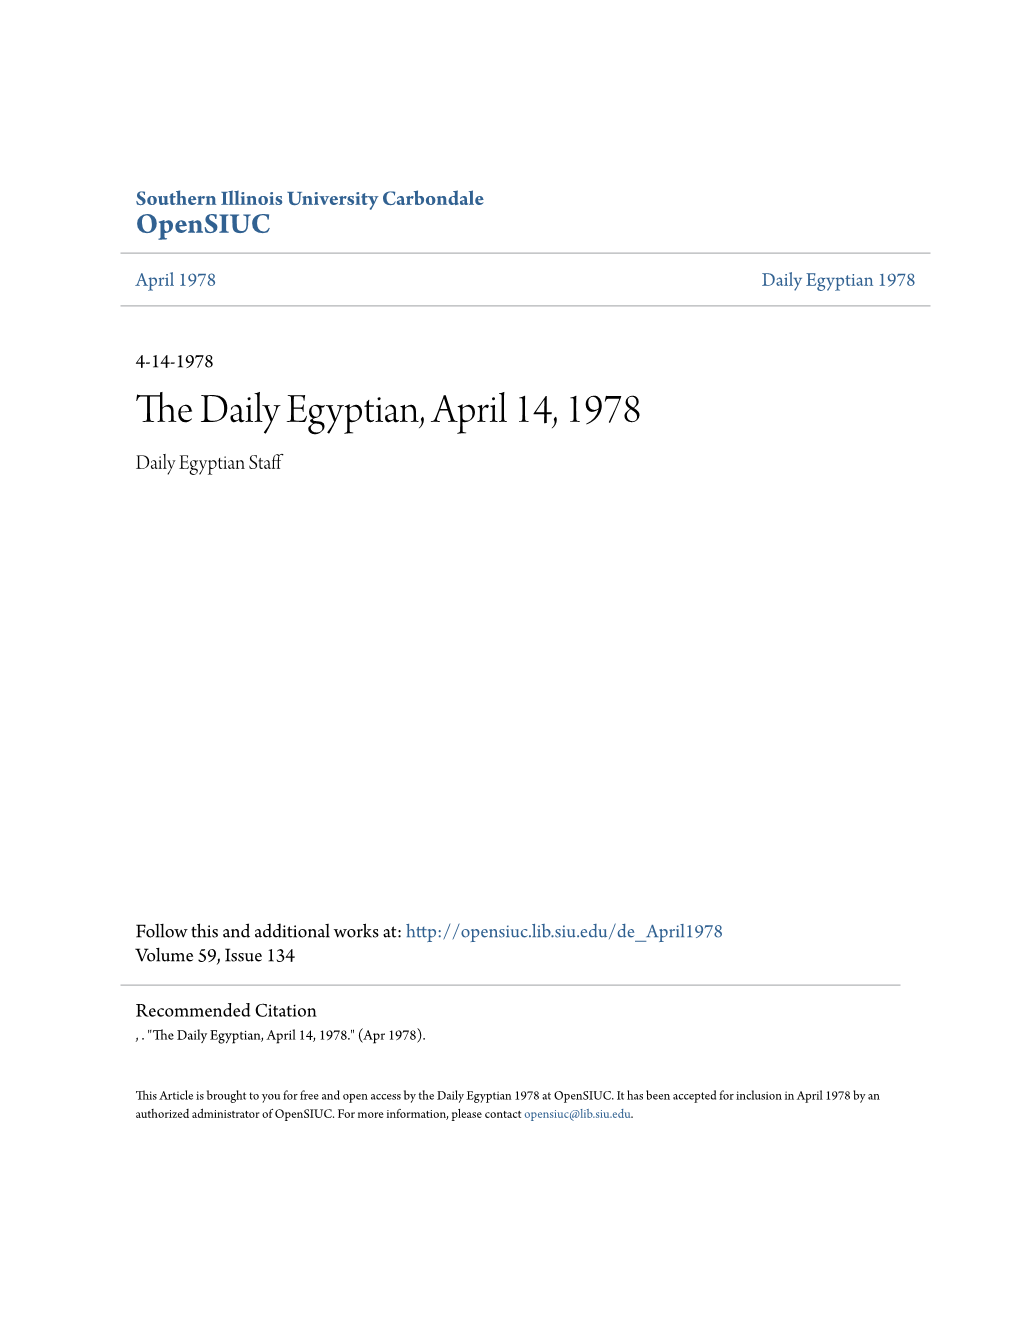 The Daily Egyptian, April 14, 1978